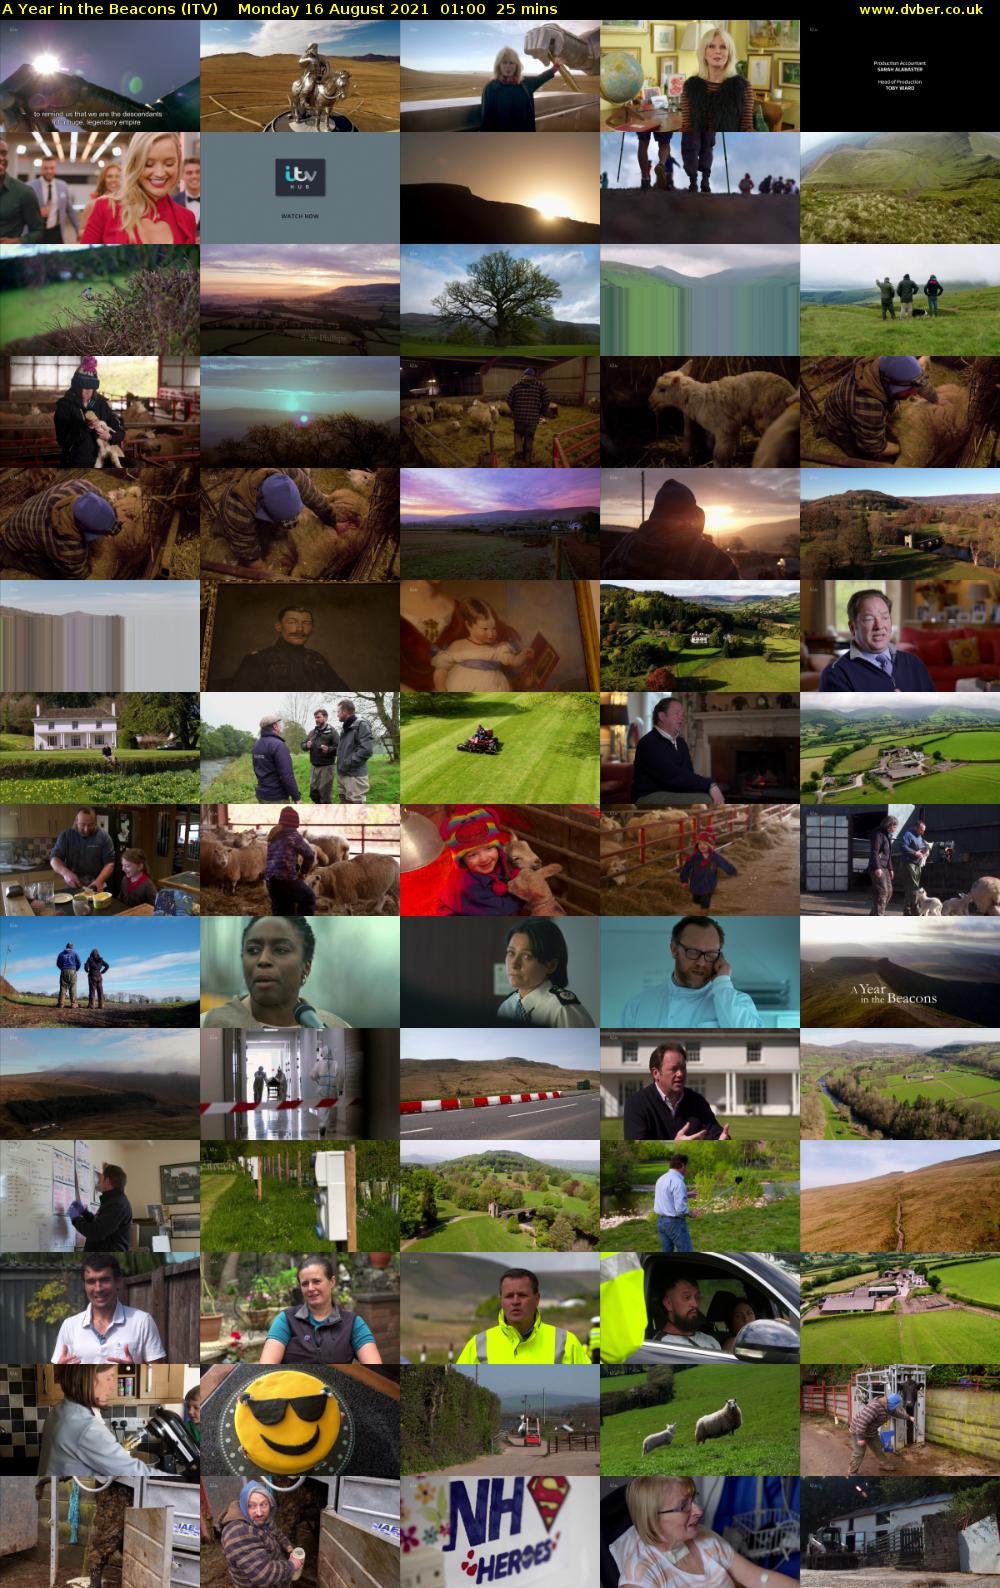 A Year in the Beacons (ITV) Monday 16 August 2021 01:00 - 01:25